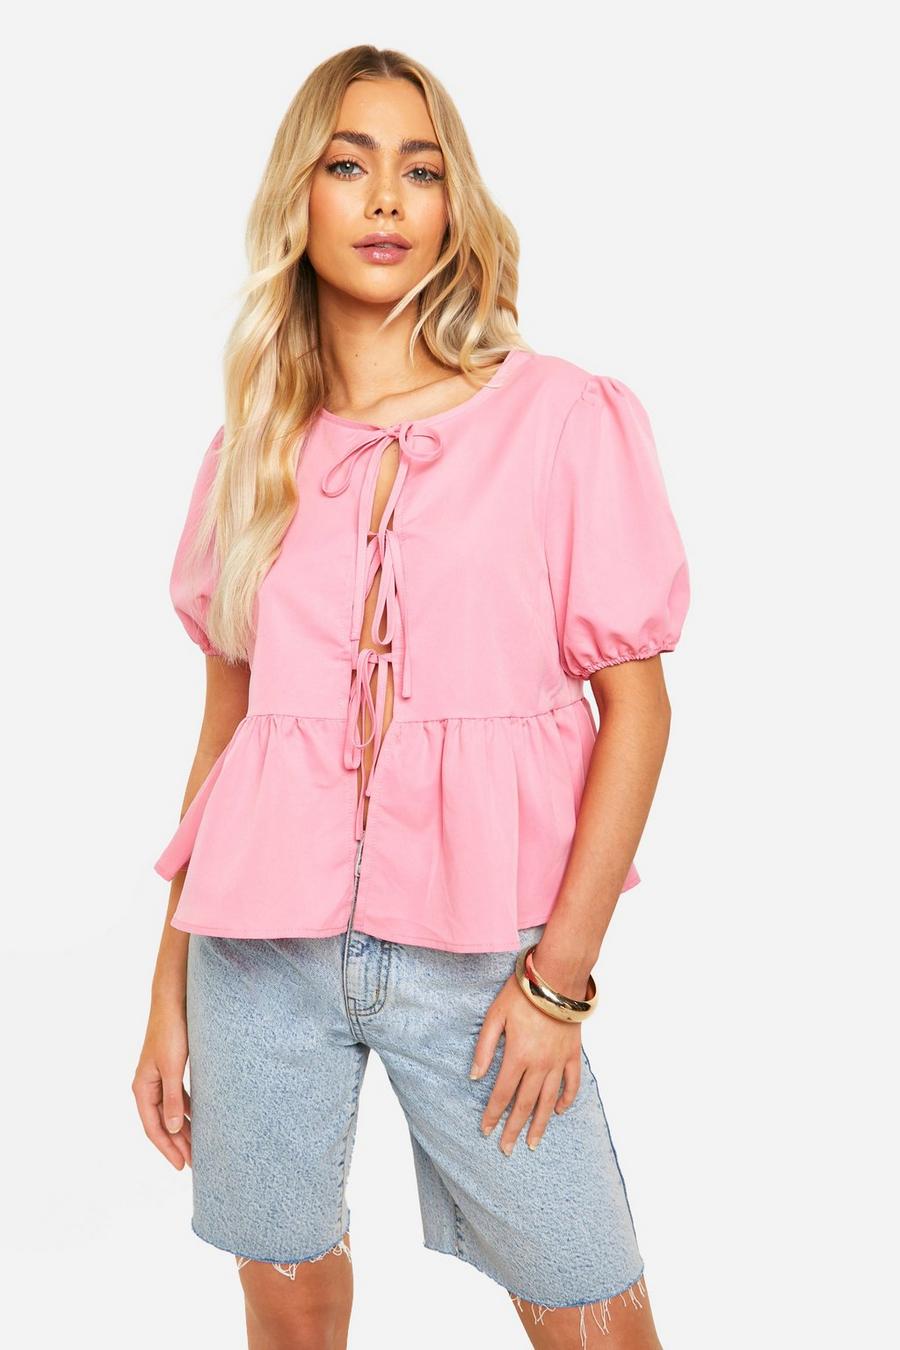 Baby pink Last Chance Sale 